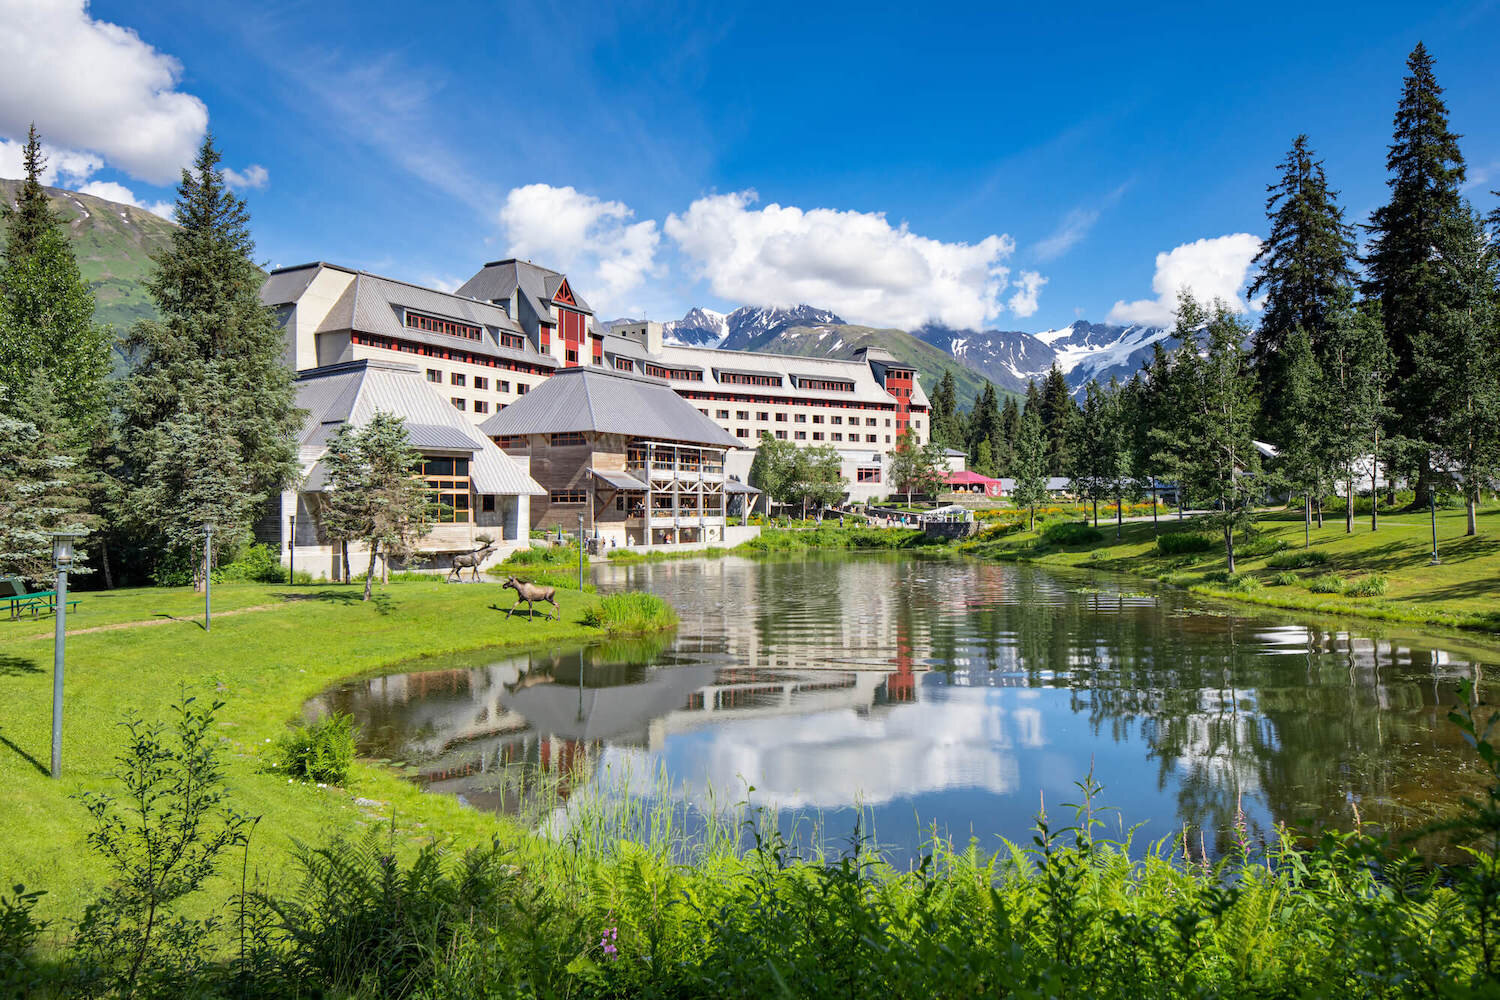  View of Hotel Alyeska with the pond in the foreground 